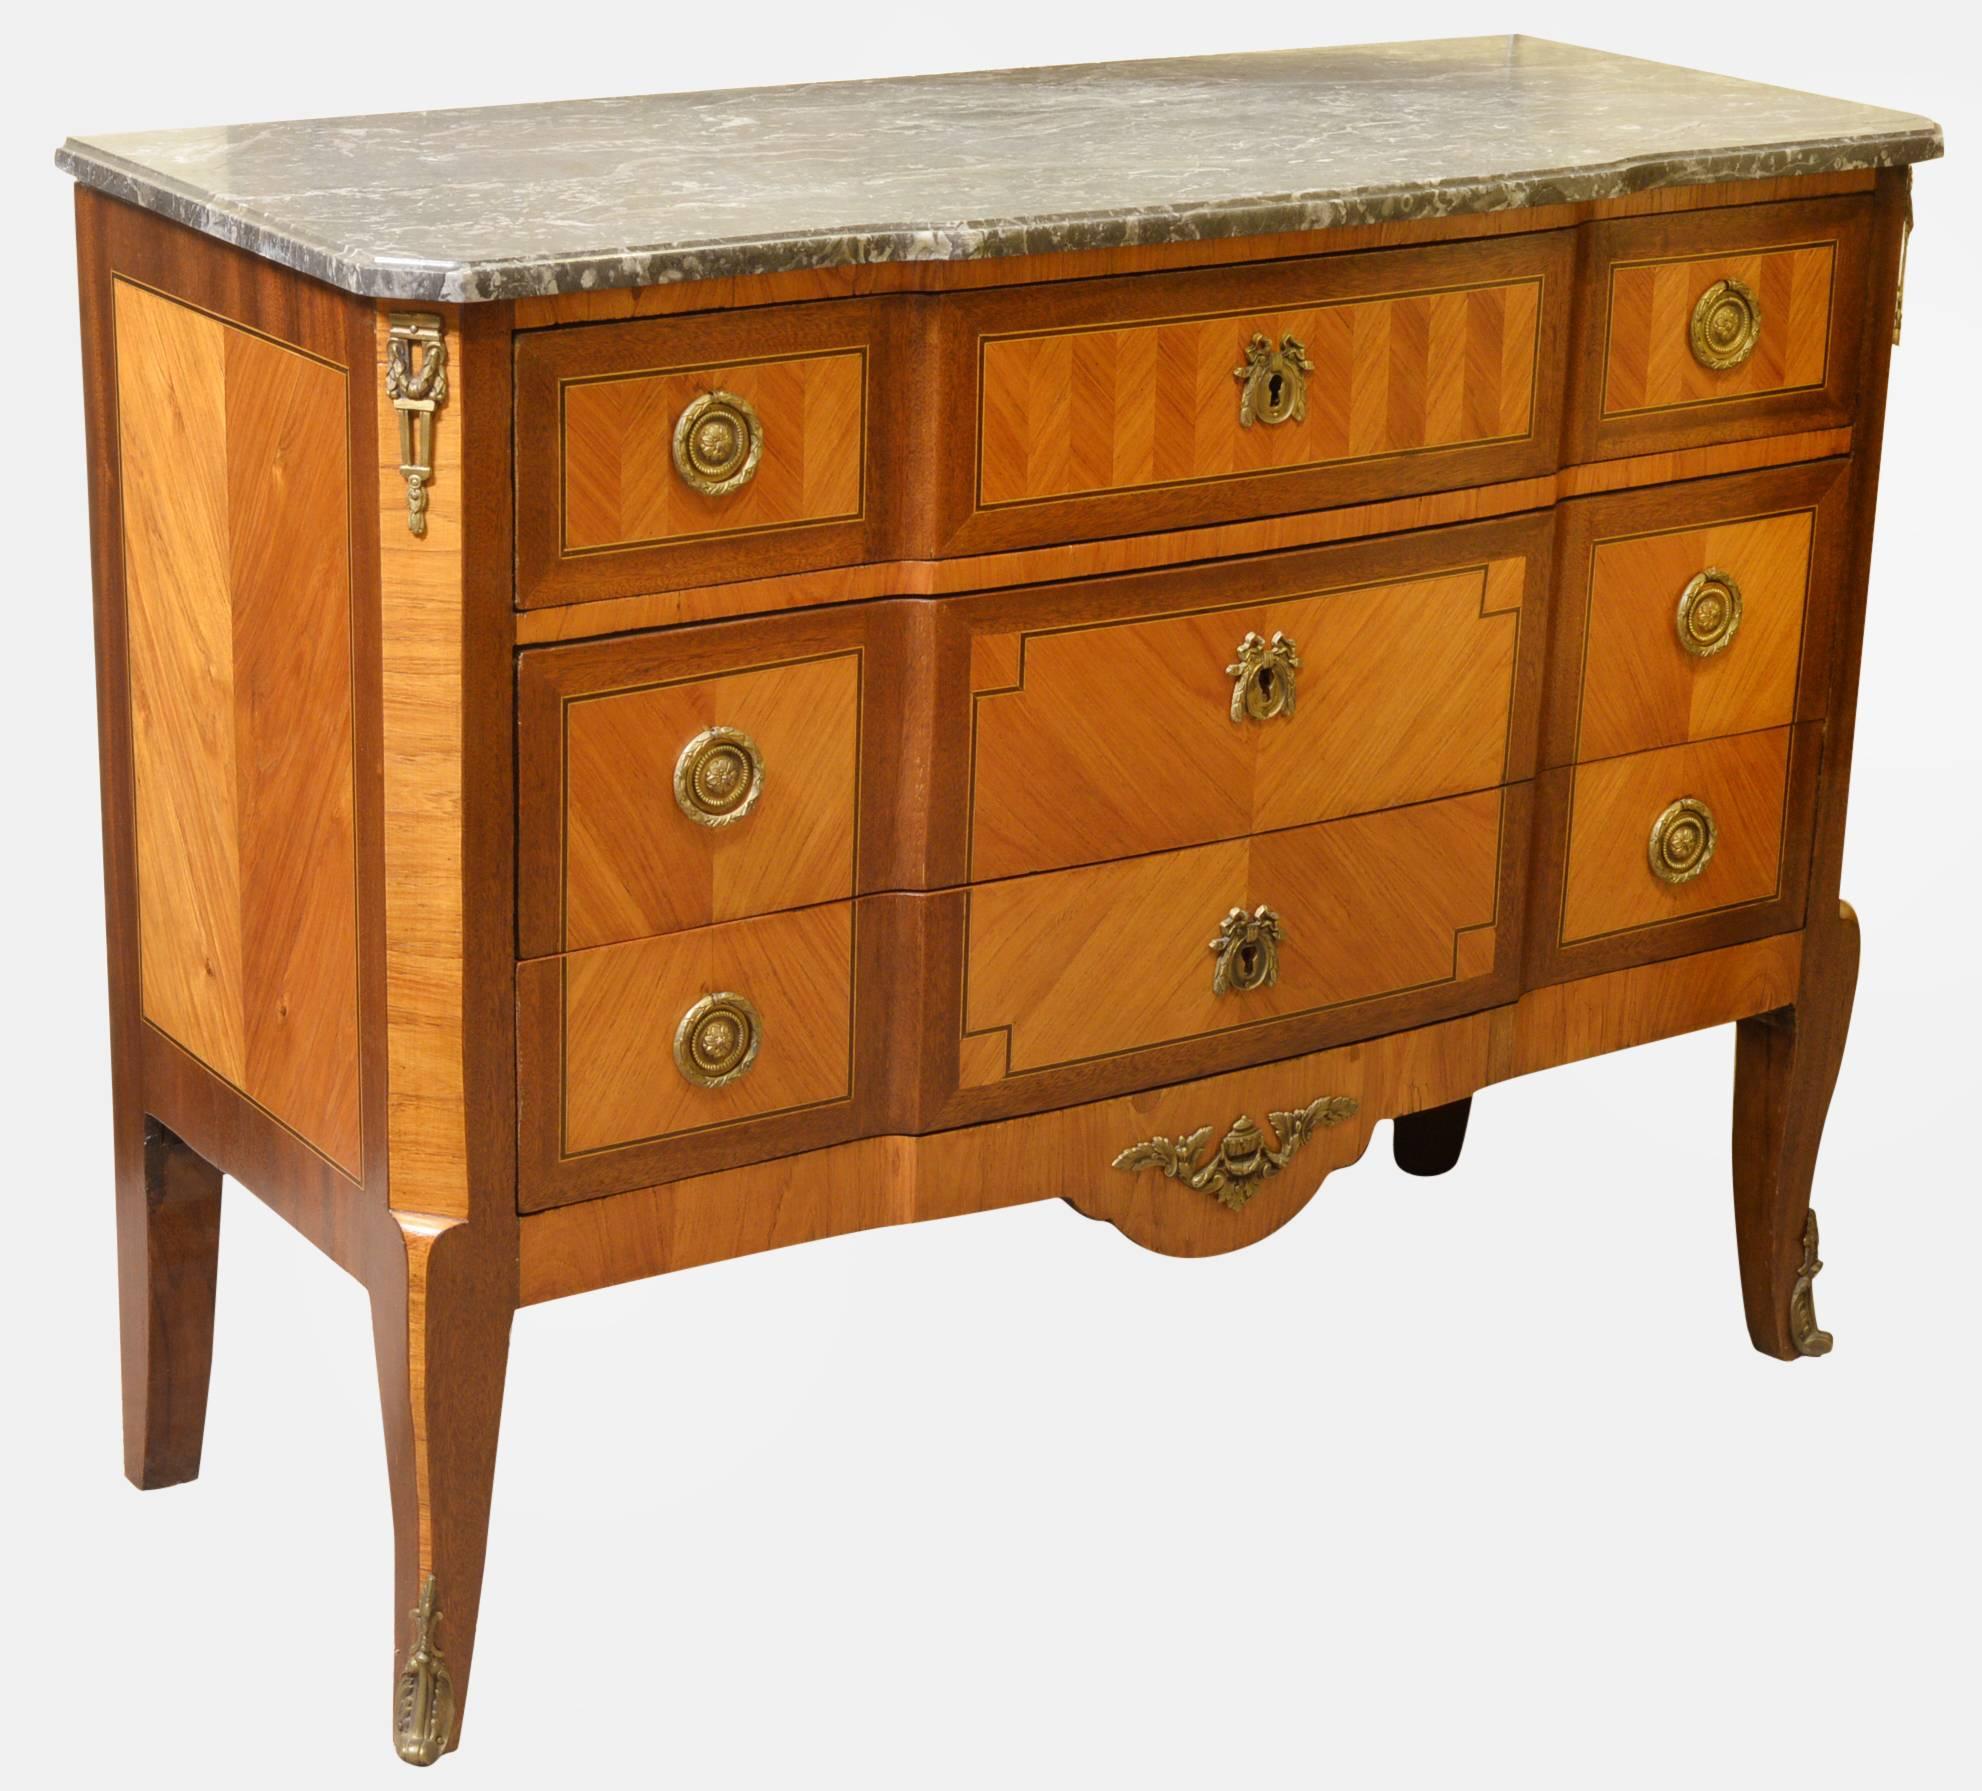 A French transitional style marble-topped commode on short cabriole legs with ormolu mounts.

circa 1900.
Measures:
83cm (32.7